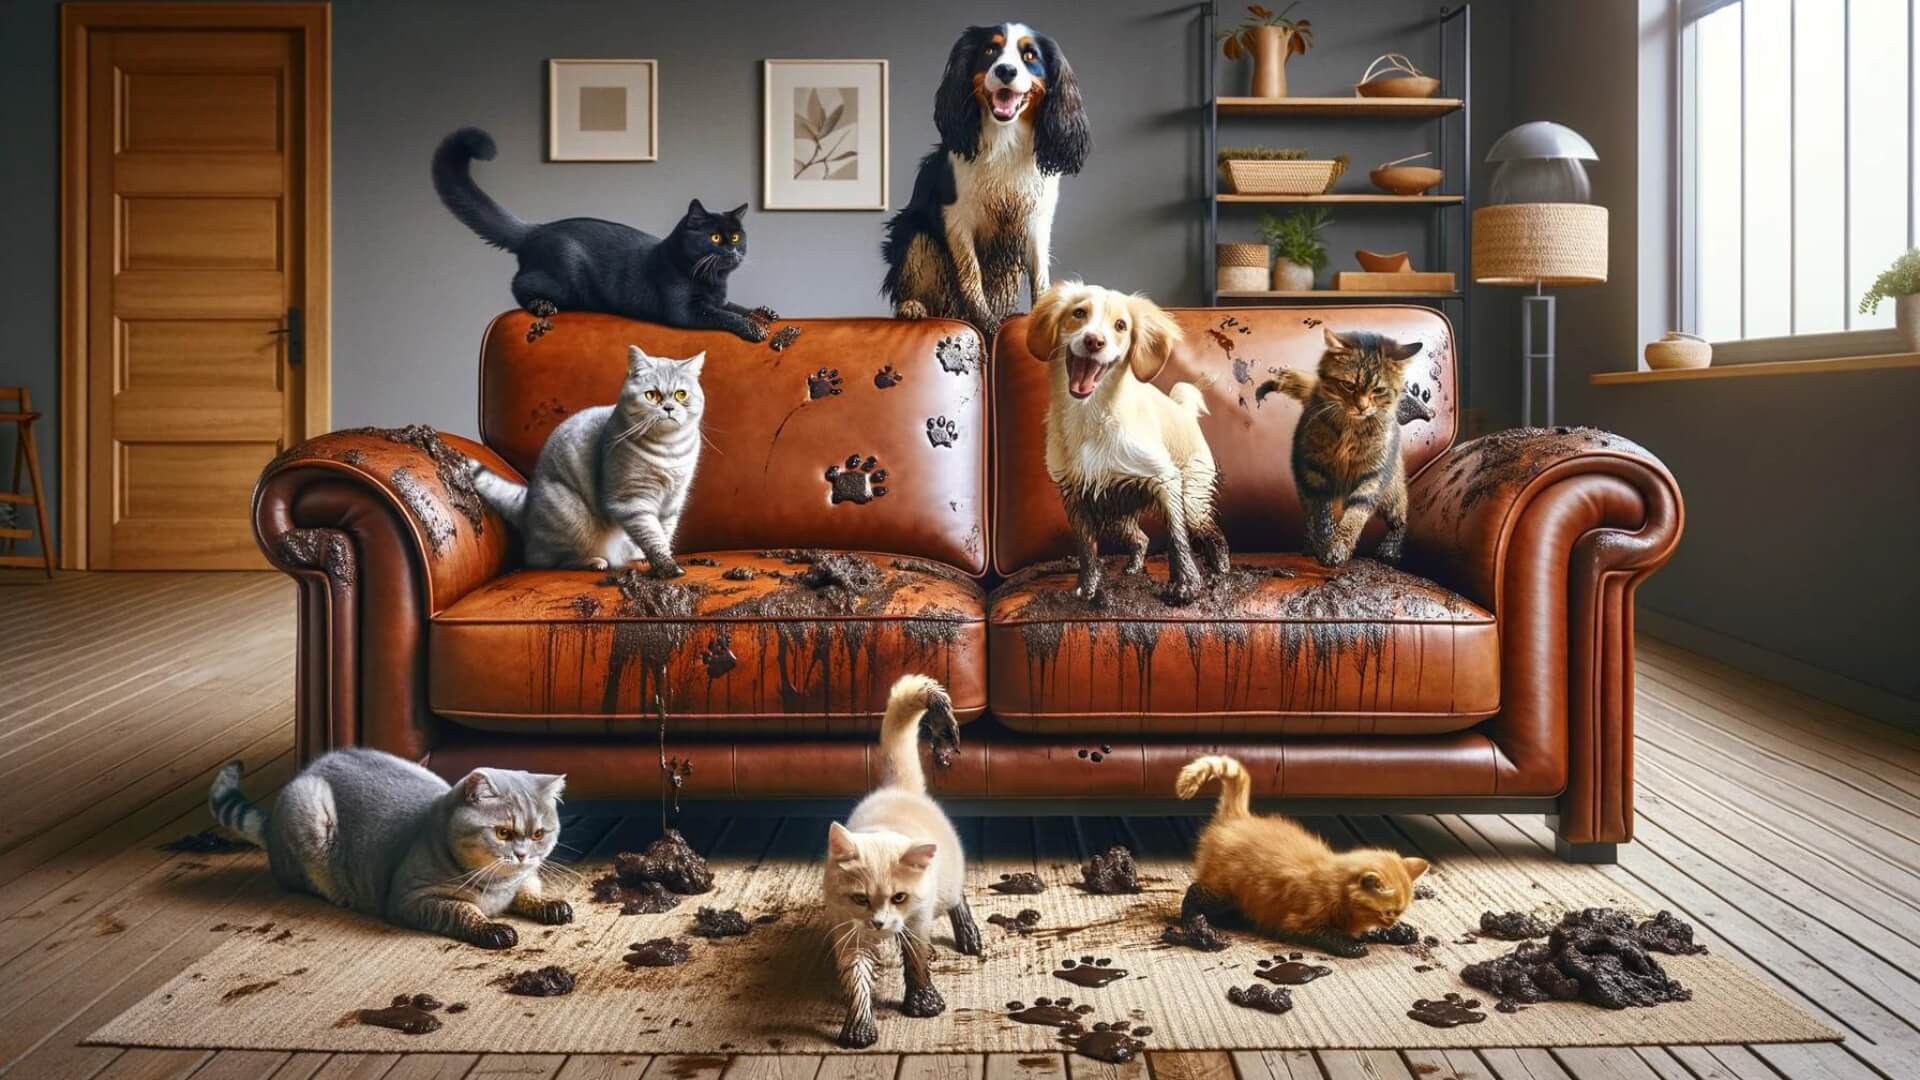 muddy animals put their pawprints all over the beautiful leather sofa